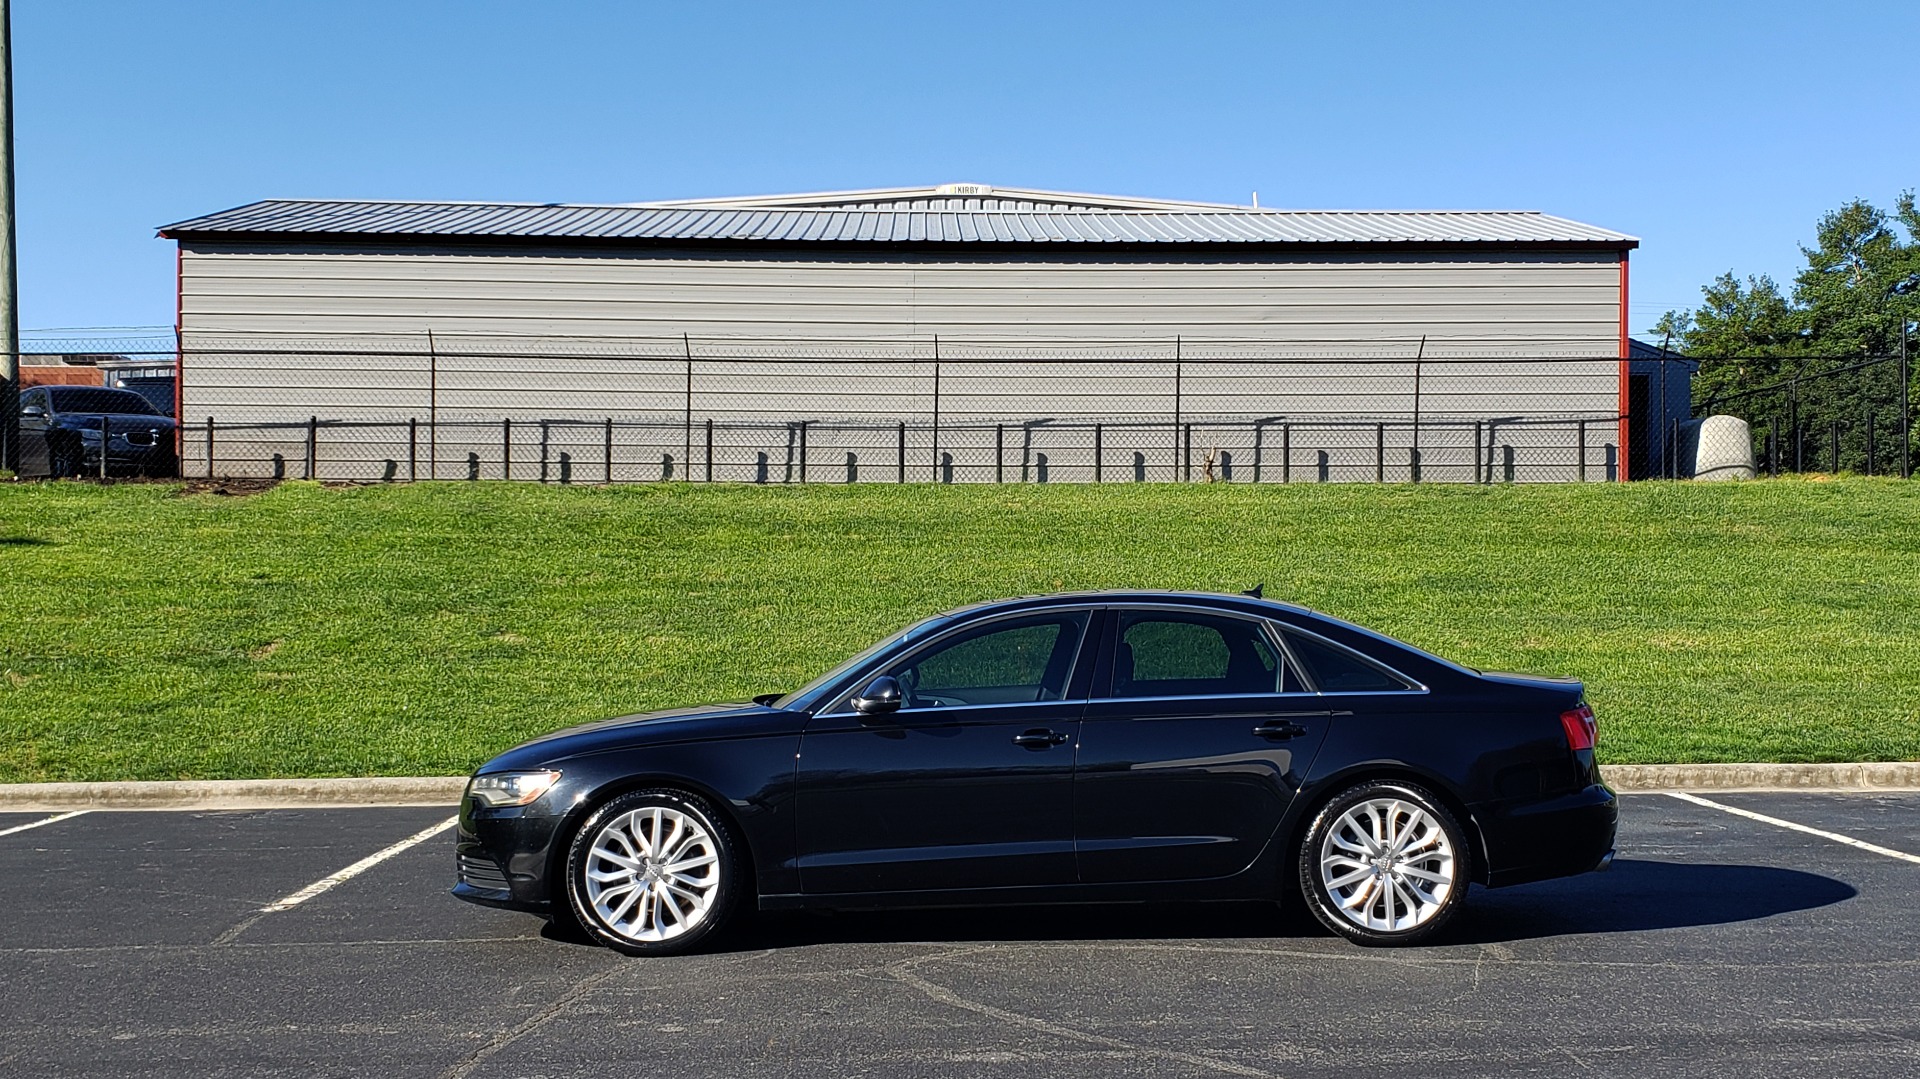 Used 2012 Audi A6 2.0T PREMIUM PLUS / NAV / SNRF / CVT TRANS / REARVIEW for sale Sold at Formula Imports in Charlotte NC 28227 2